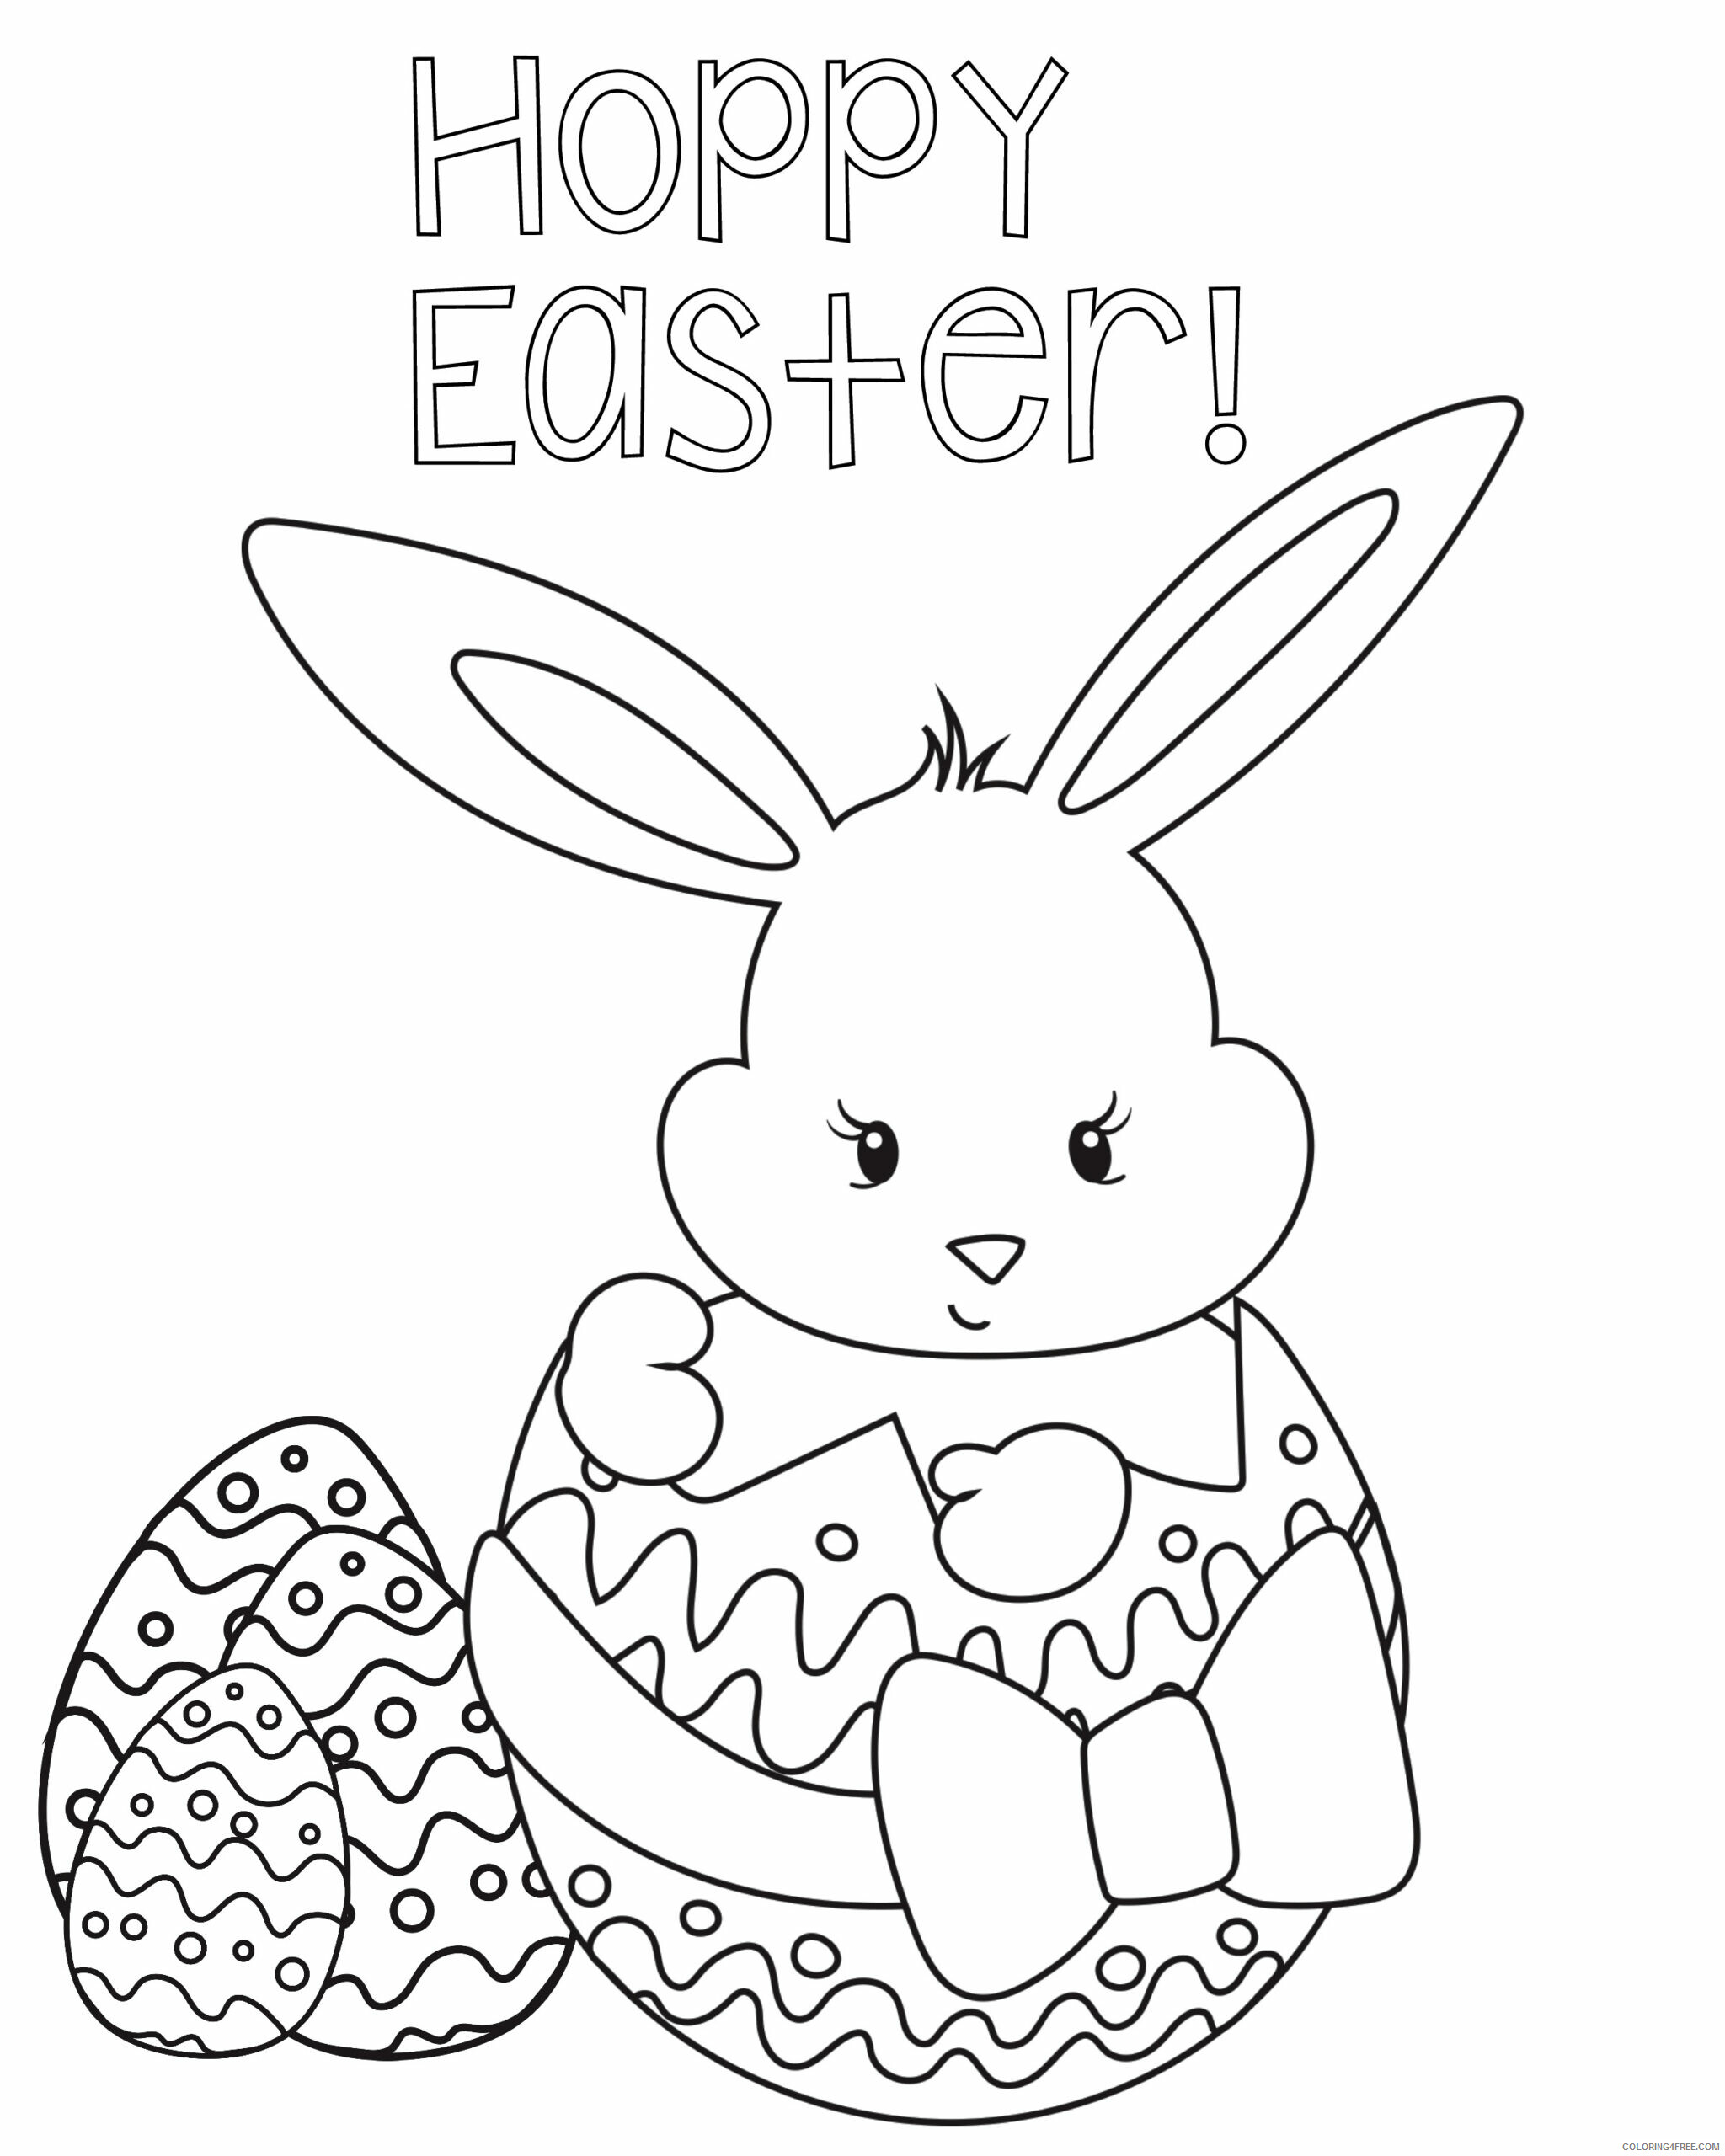 Easter Coloring Pages Holiday Happy Easter Frees Printable 2021 0319 Coloring4free